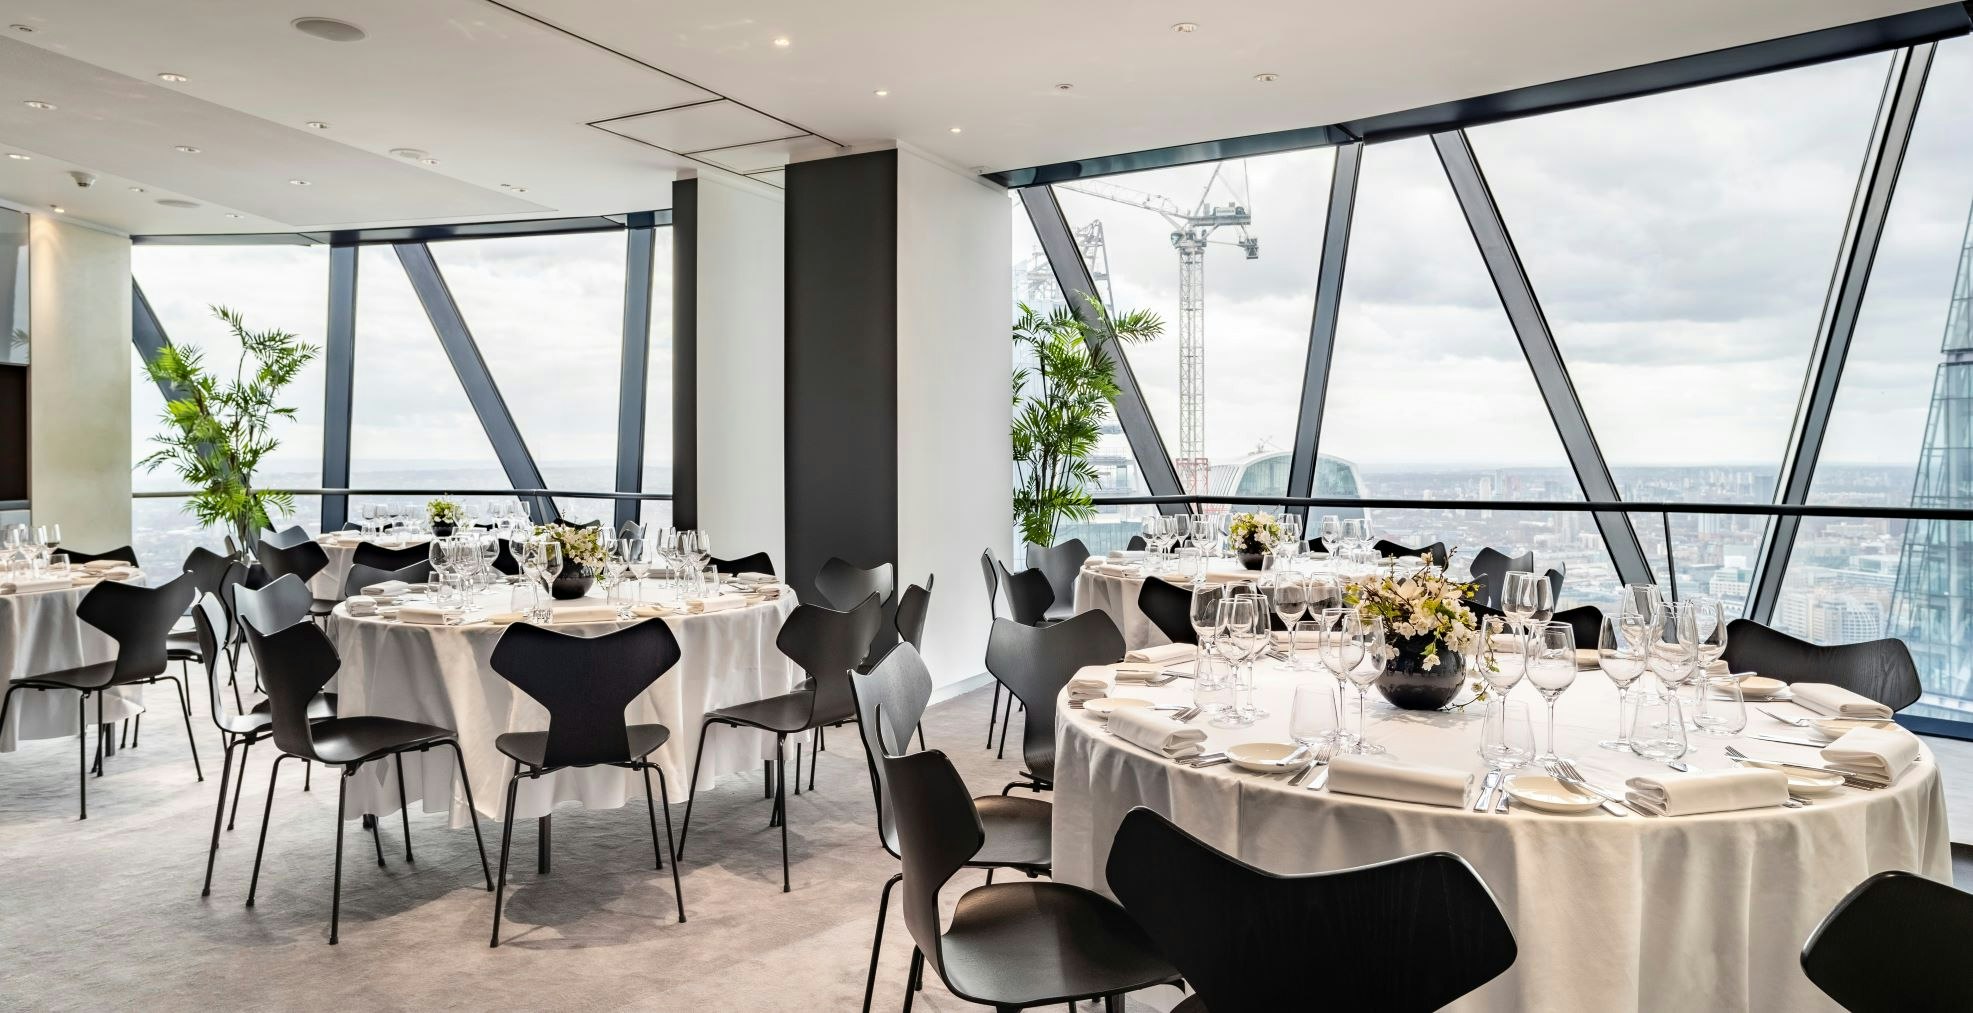 Private Dining Rooms Venues in London - Searcys at the Gherkin